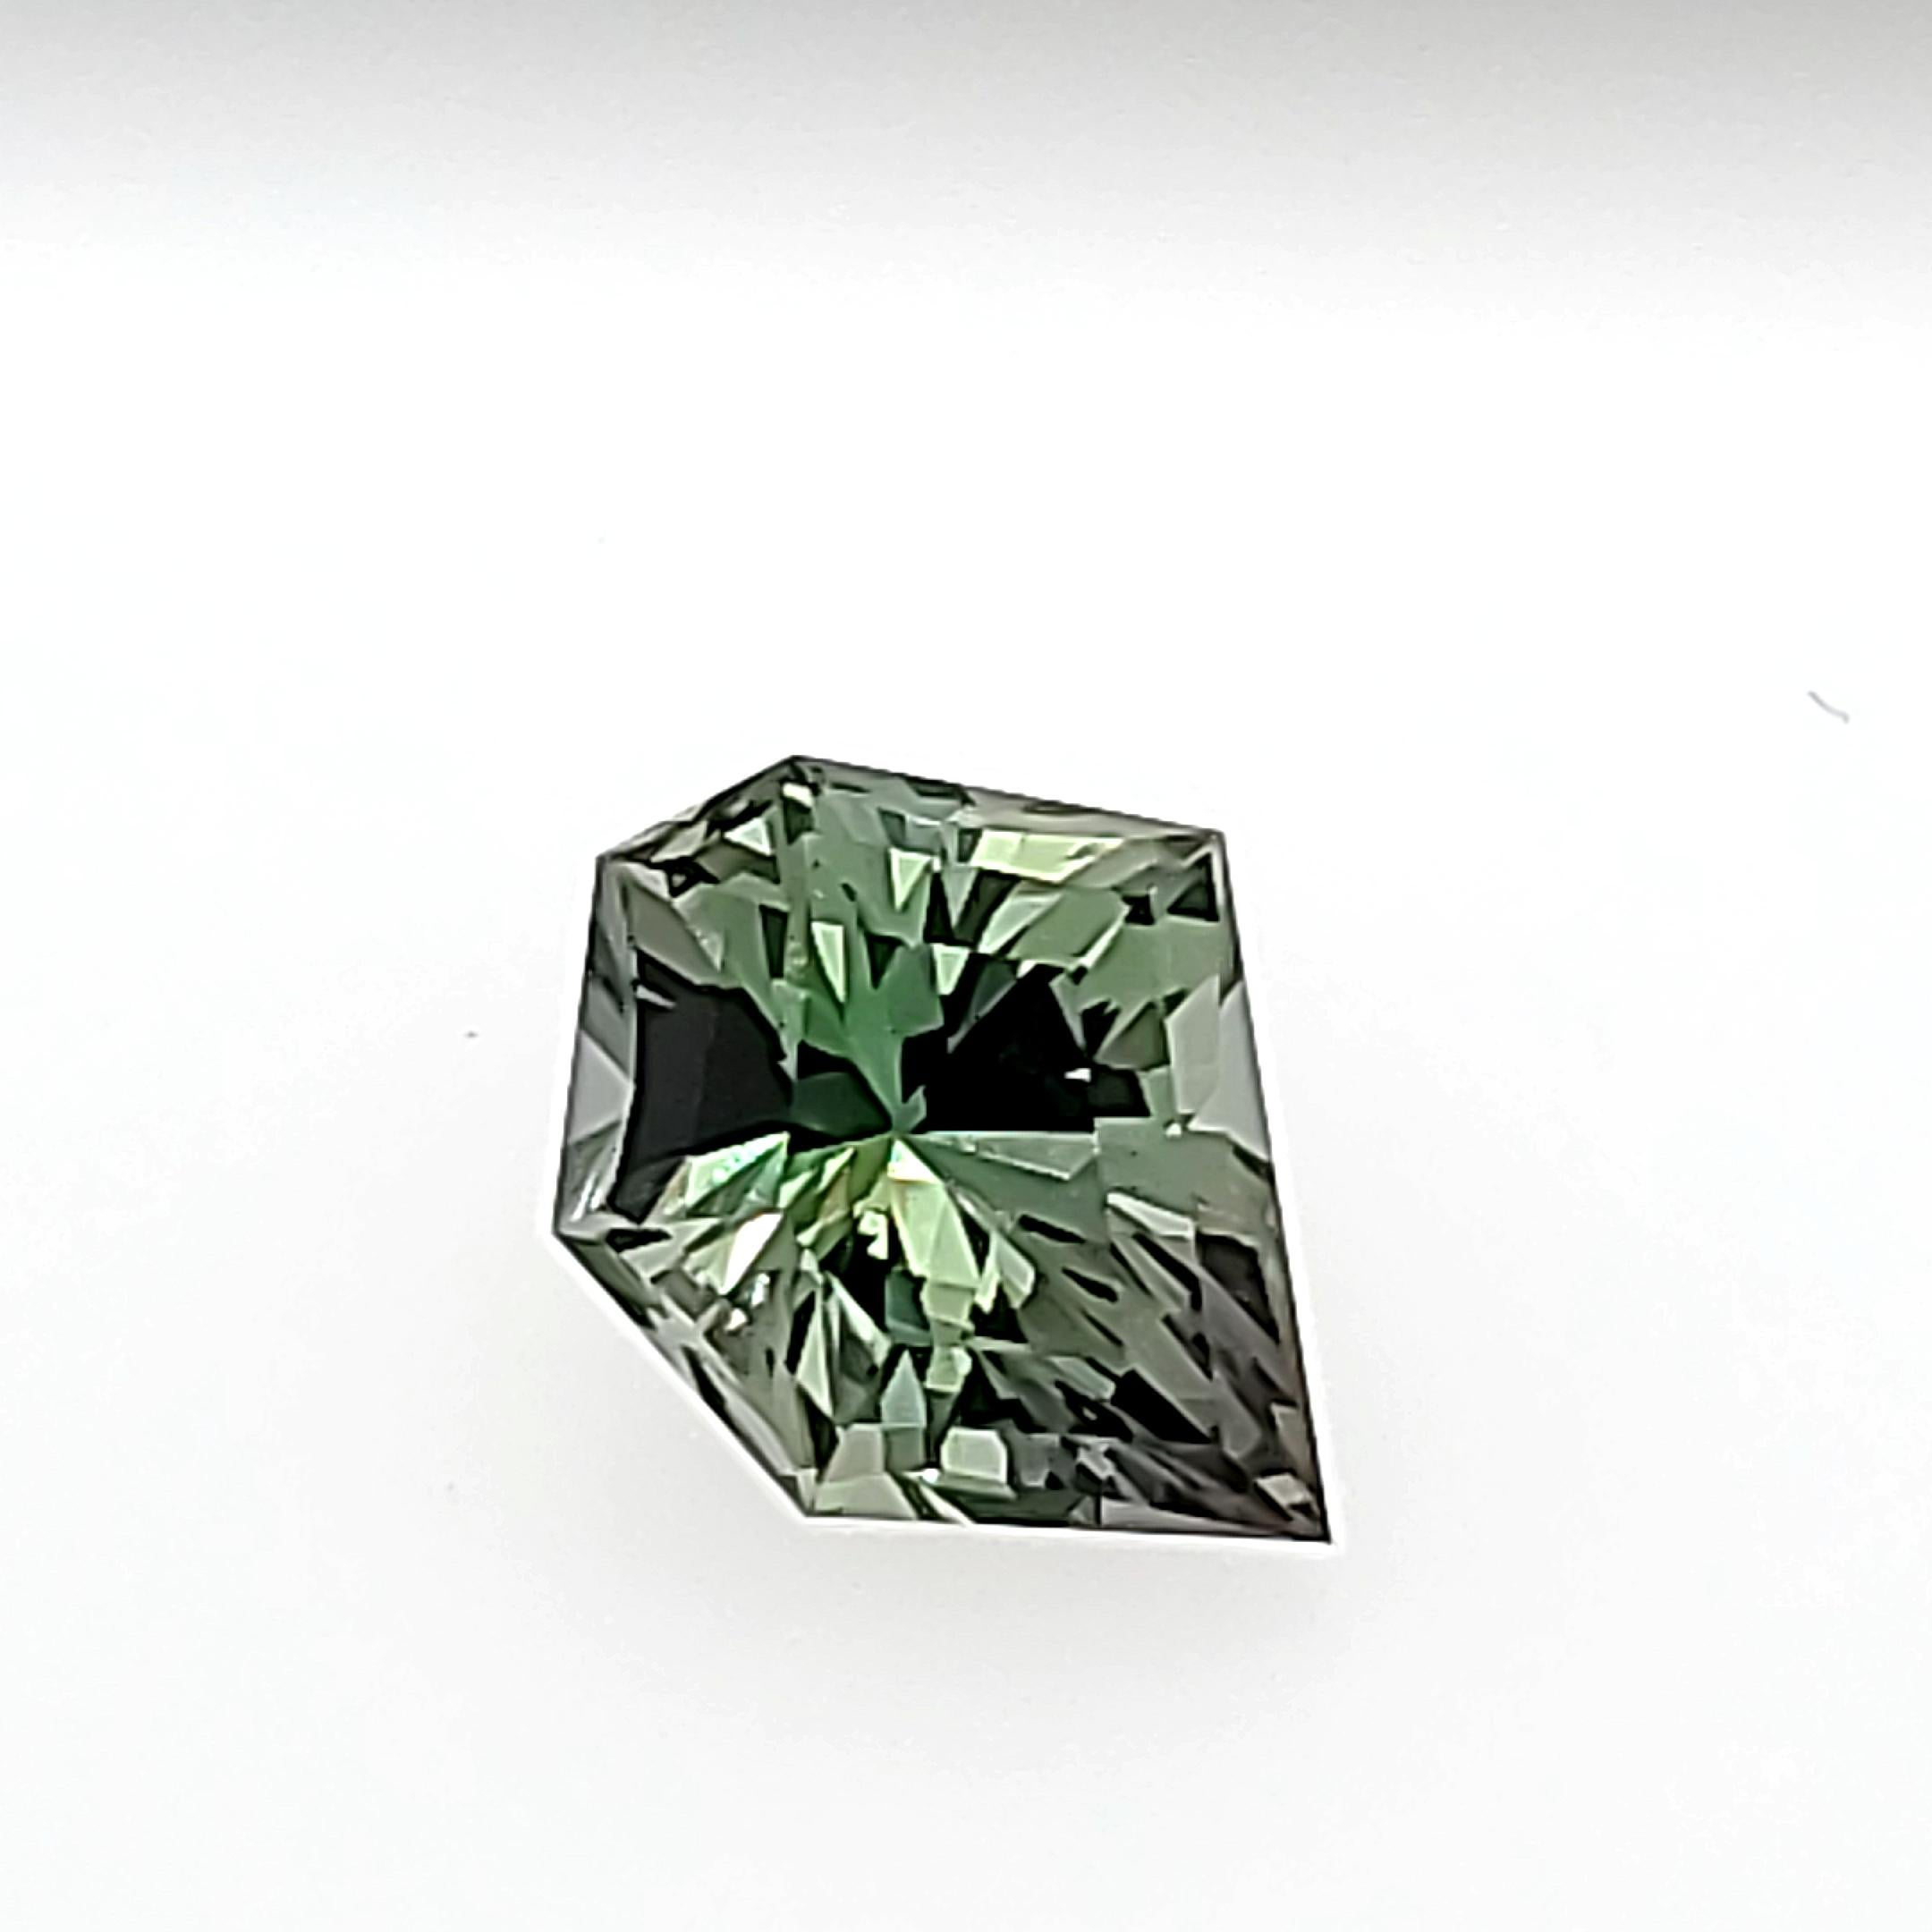 Mixed Cut 4.27ct Freeform GREEN Zoisite (same mineral as Tanzanite!)  Unique Cut & Color! For Sale